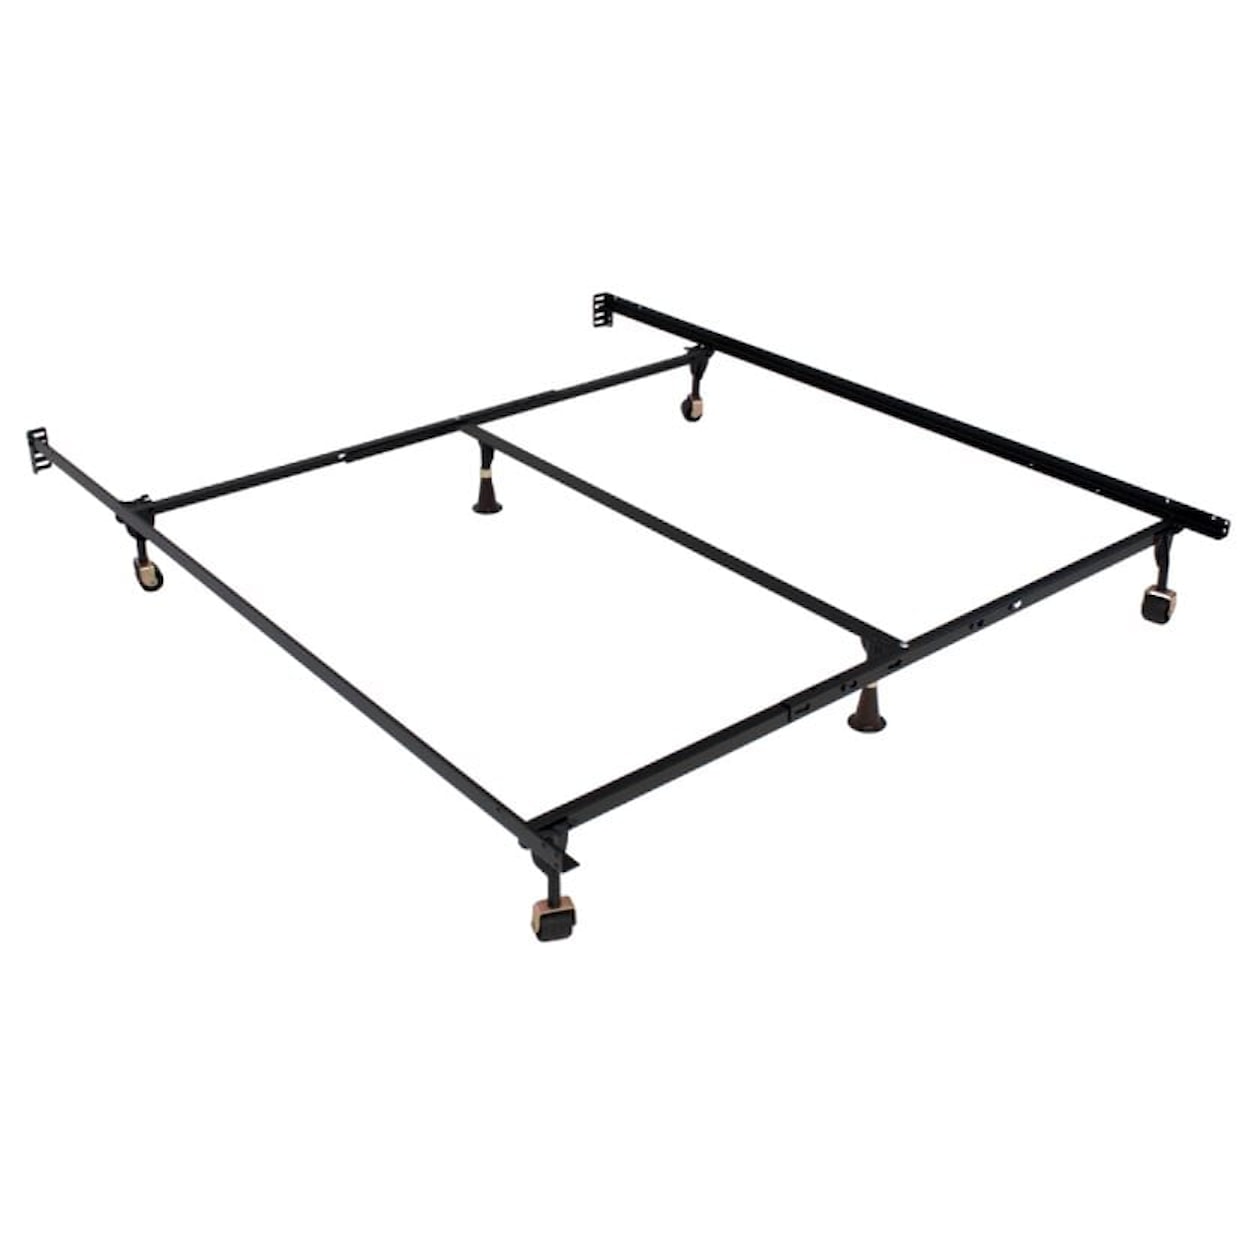 Hollywood Bed Frame Company Promo Twin-Full-Queen Bed Frame